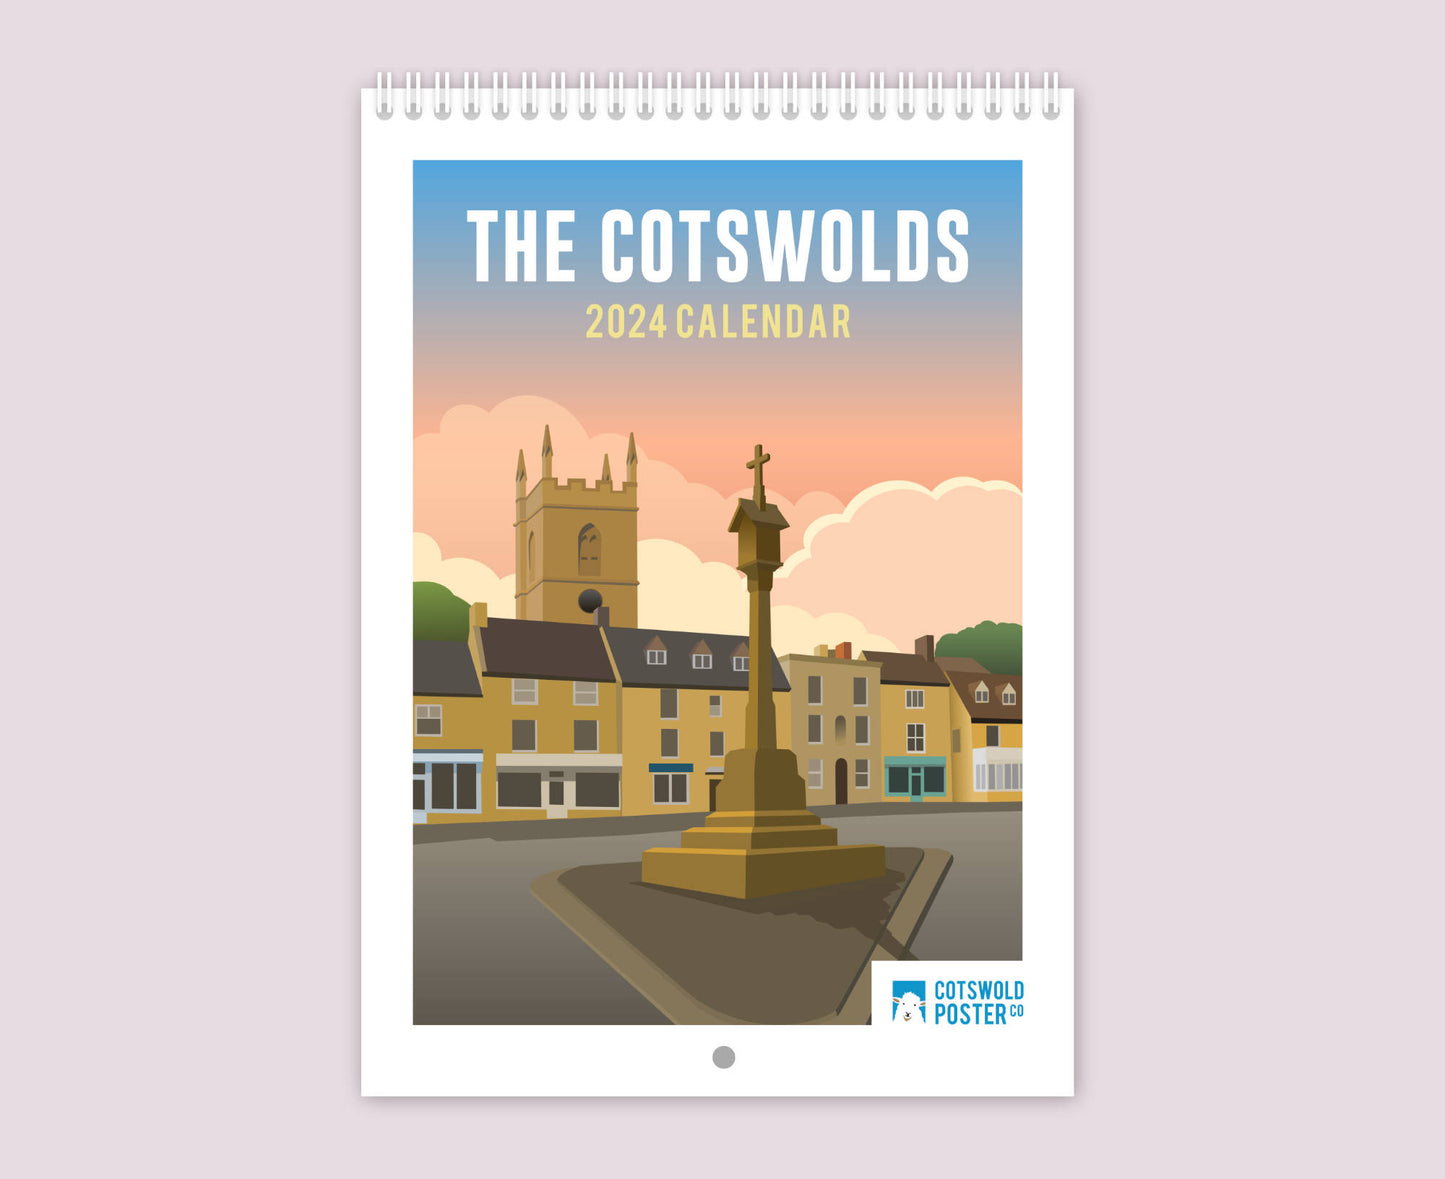 The Cotswolds 2024 Calendar front cover